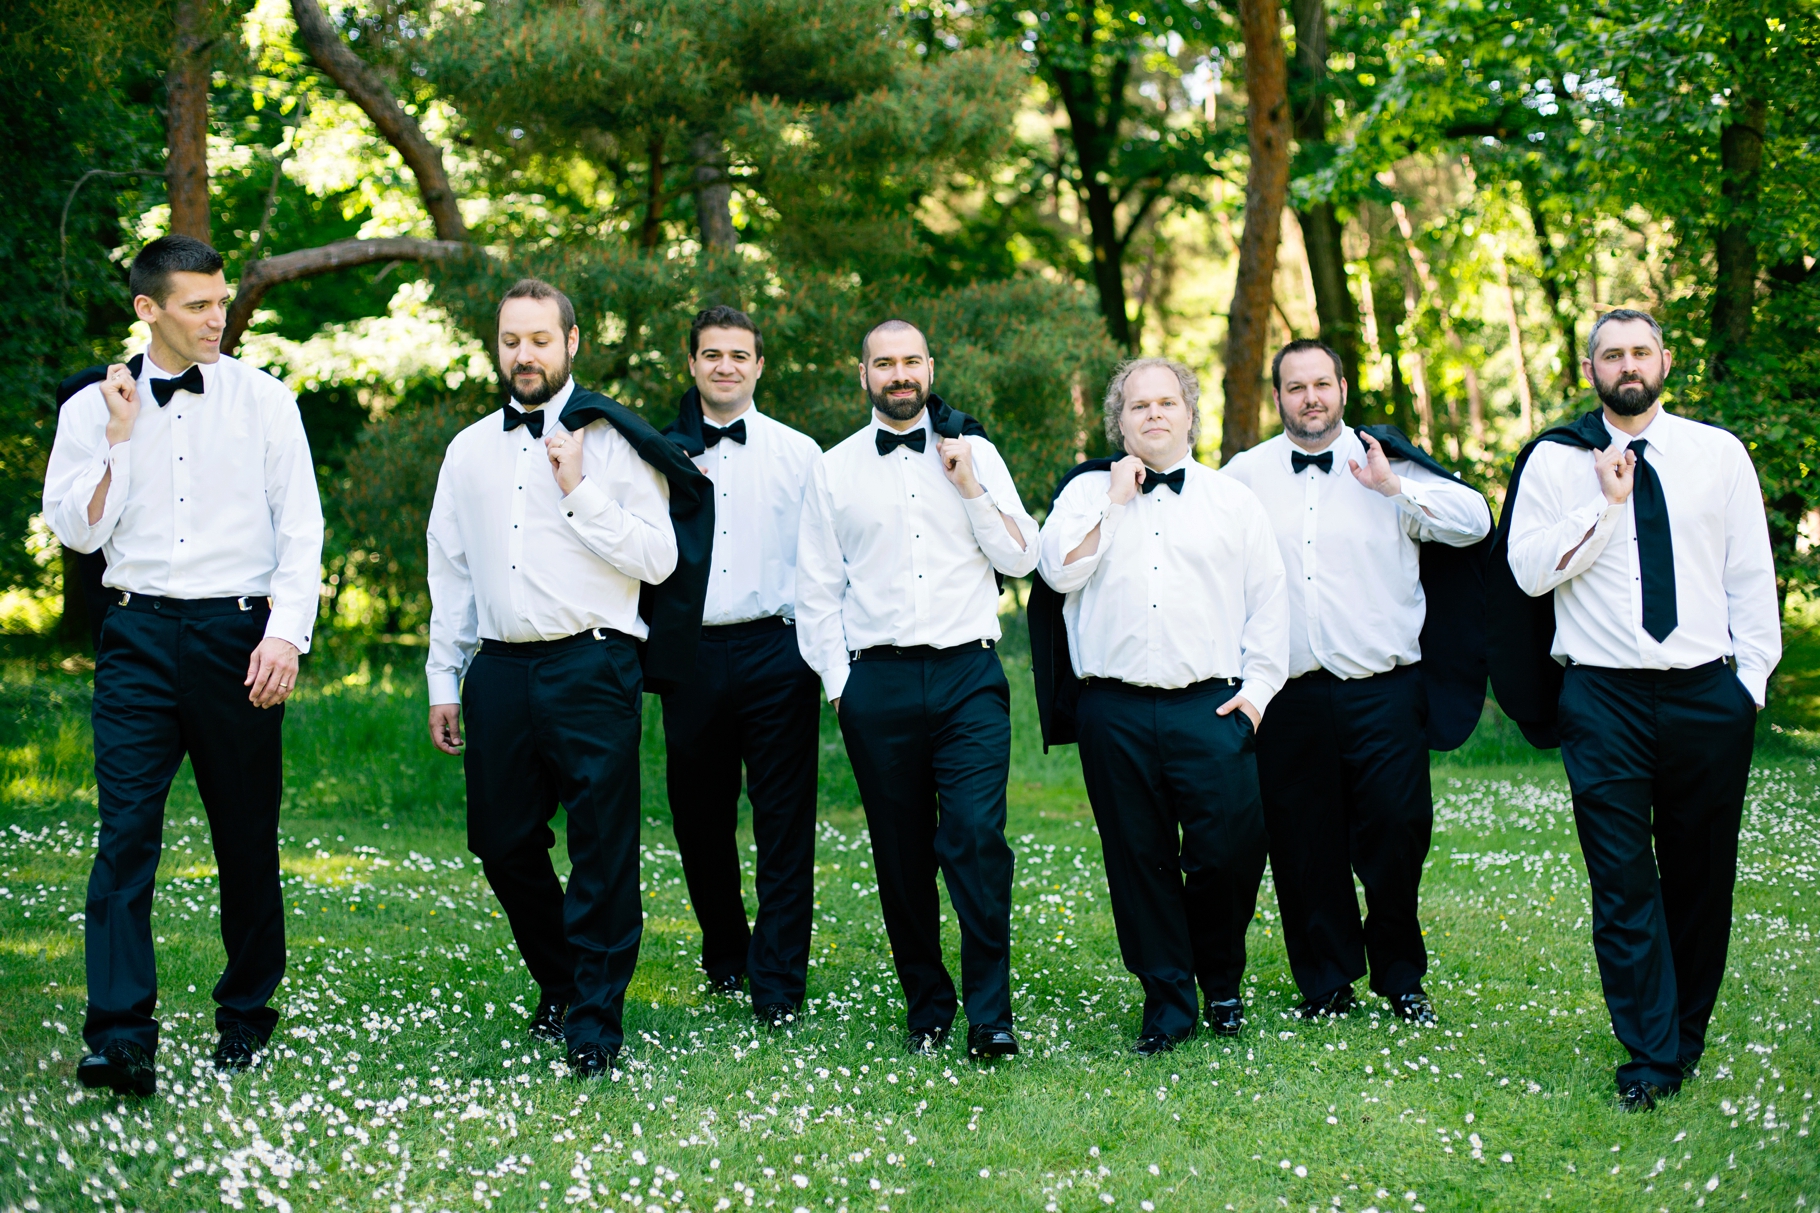 26-Groomsmen-Portraits-Groom-Black-Suits-Classic-Style-Woodland-Park-Seattle-Wedding-Photographer-Photography-by-Betty-Elaine